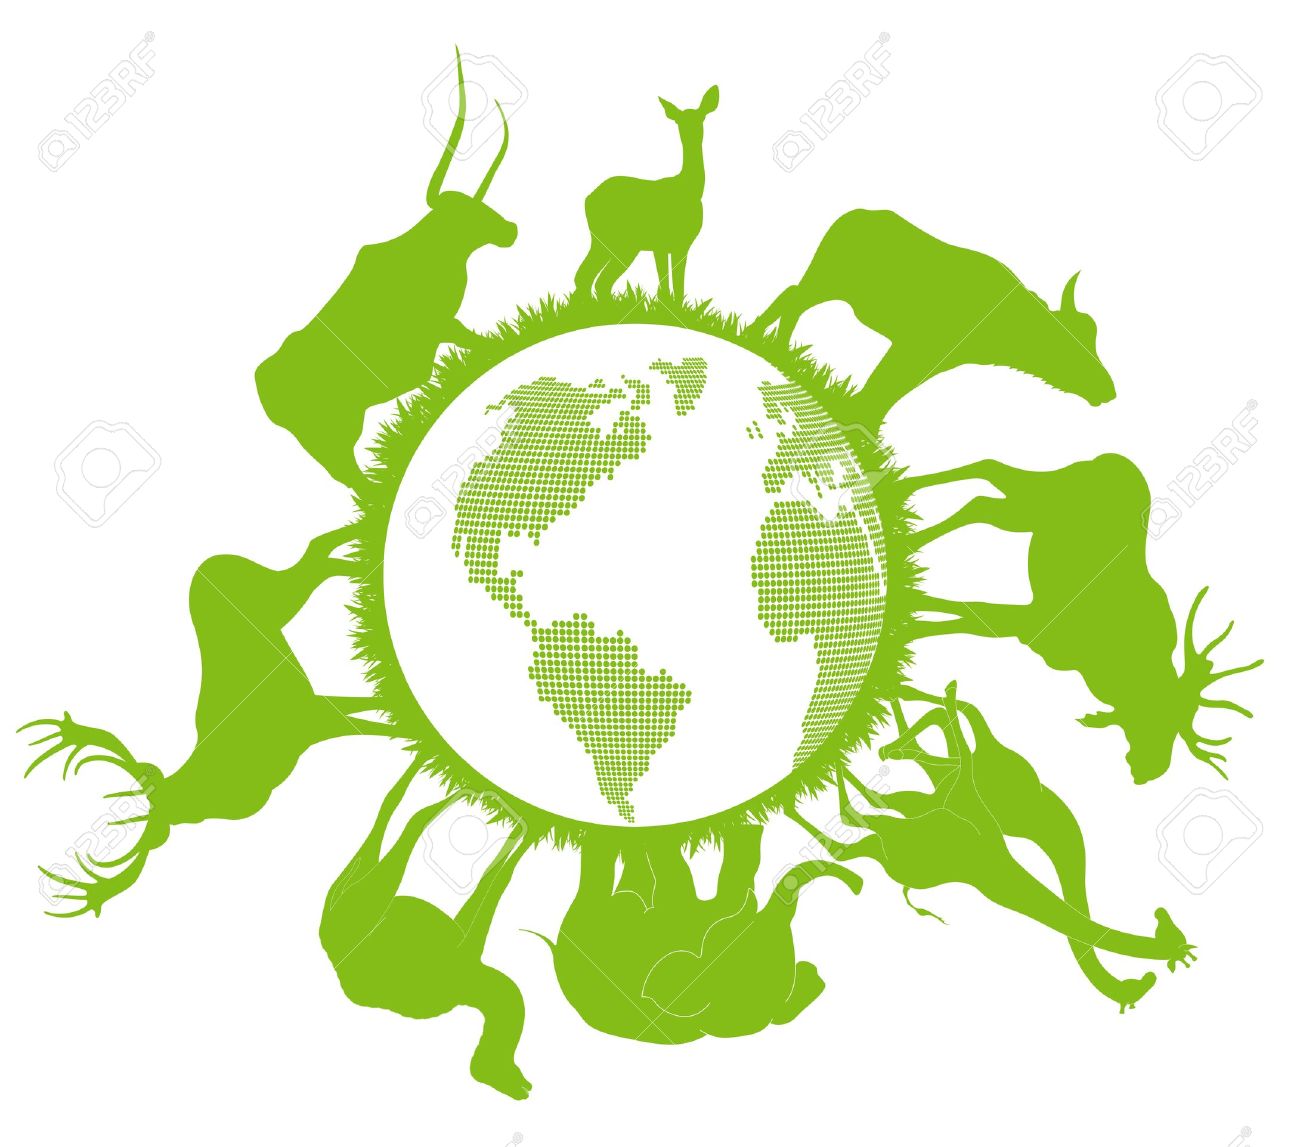 Animal Planet Vector Background Ecology Concept Royalty Free.